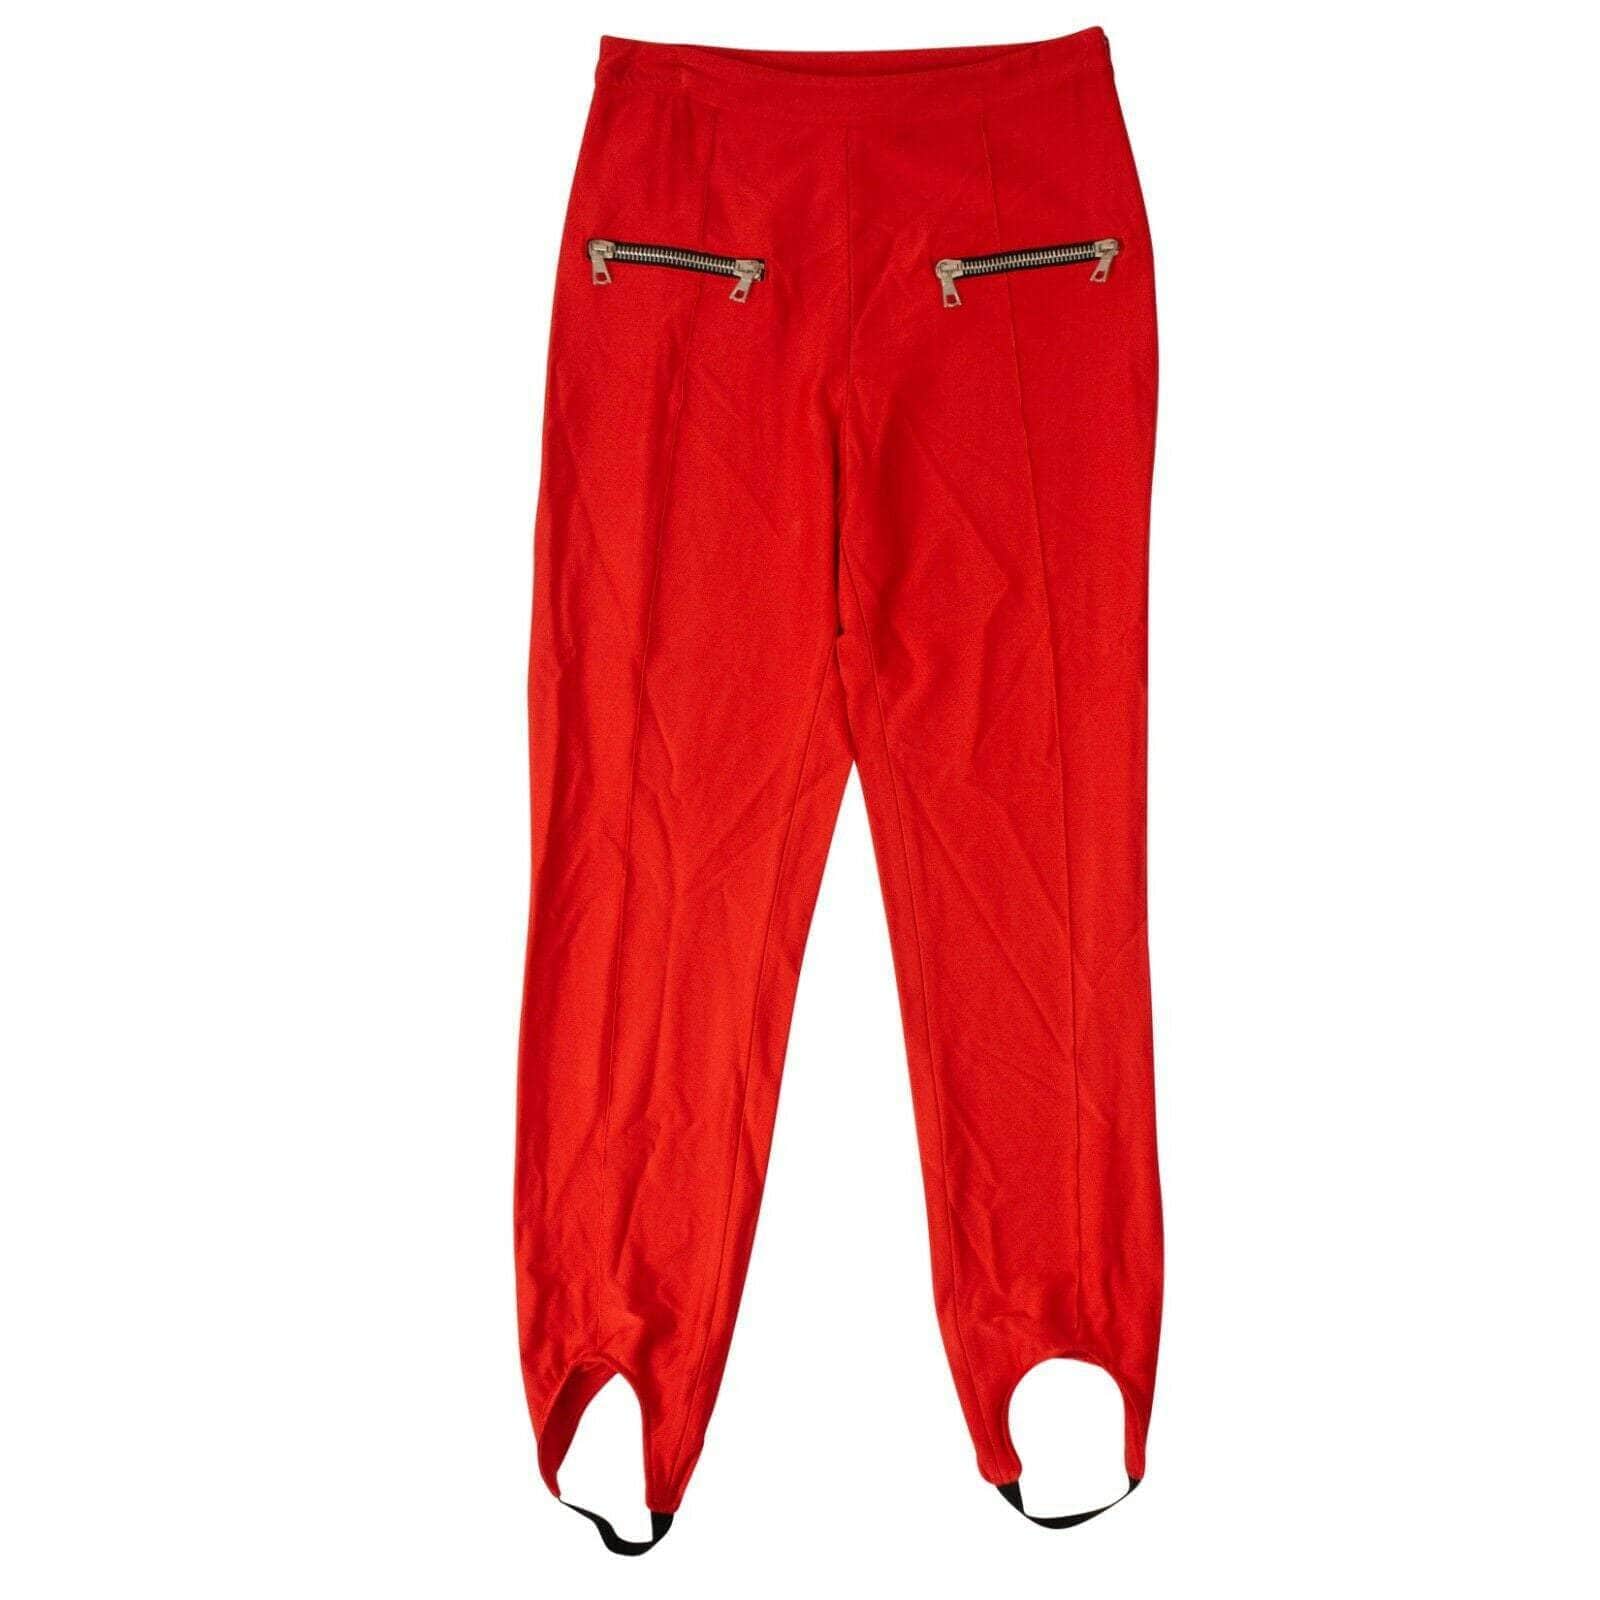 UNRAVEL PROJECT channelenable-all, couponcollection, gender-womens, main-clothing, sale-enable, size-s, under-250, unravel-project, womens-skinny-pants S Red Slim Fit Stirrup Pants 82NGG-UN-1126/S 82NGG-UN-1126/S